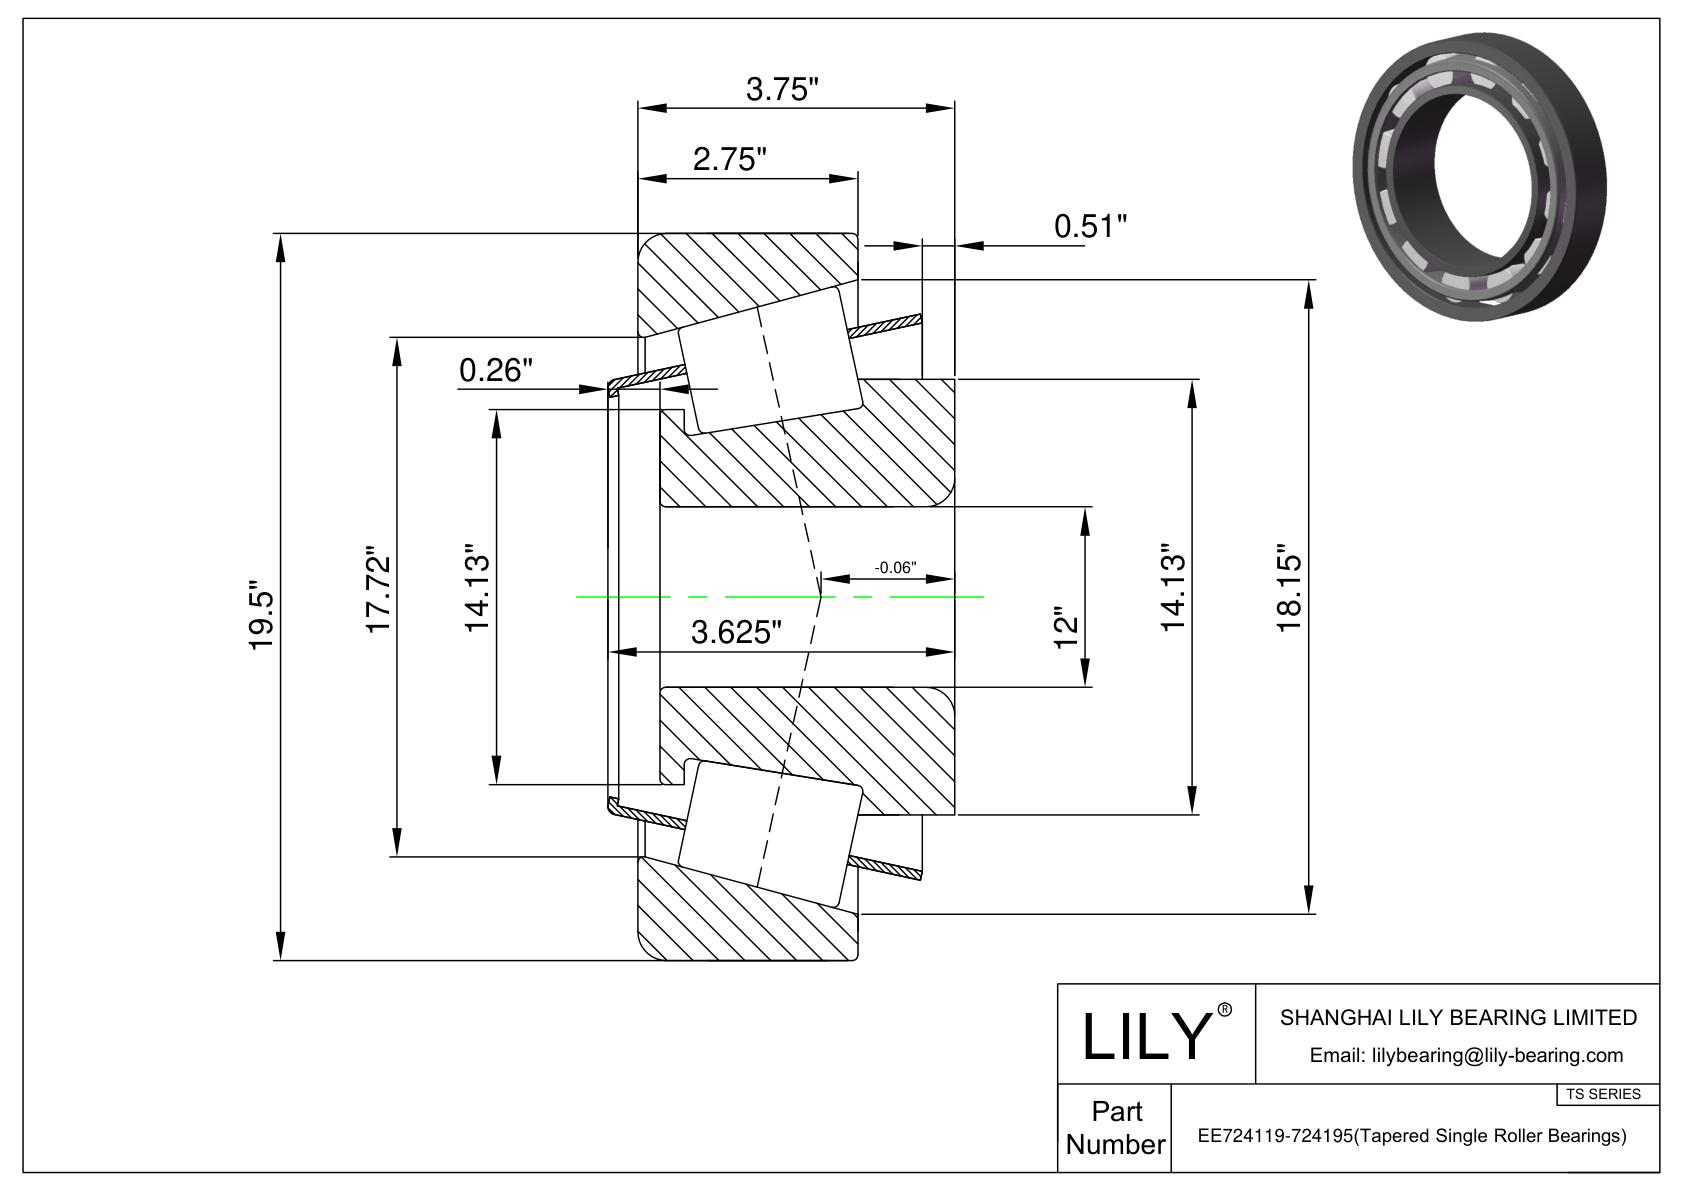 EE724119-724195 TS (Tapered Single Roller Bearings) (Imperial) cad drawing